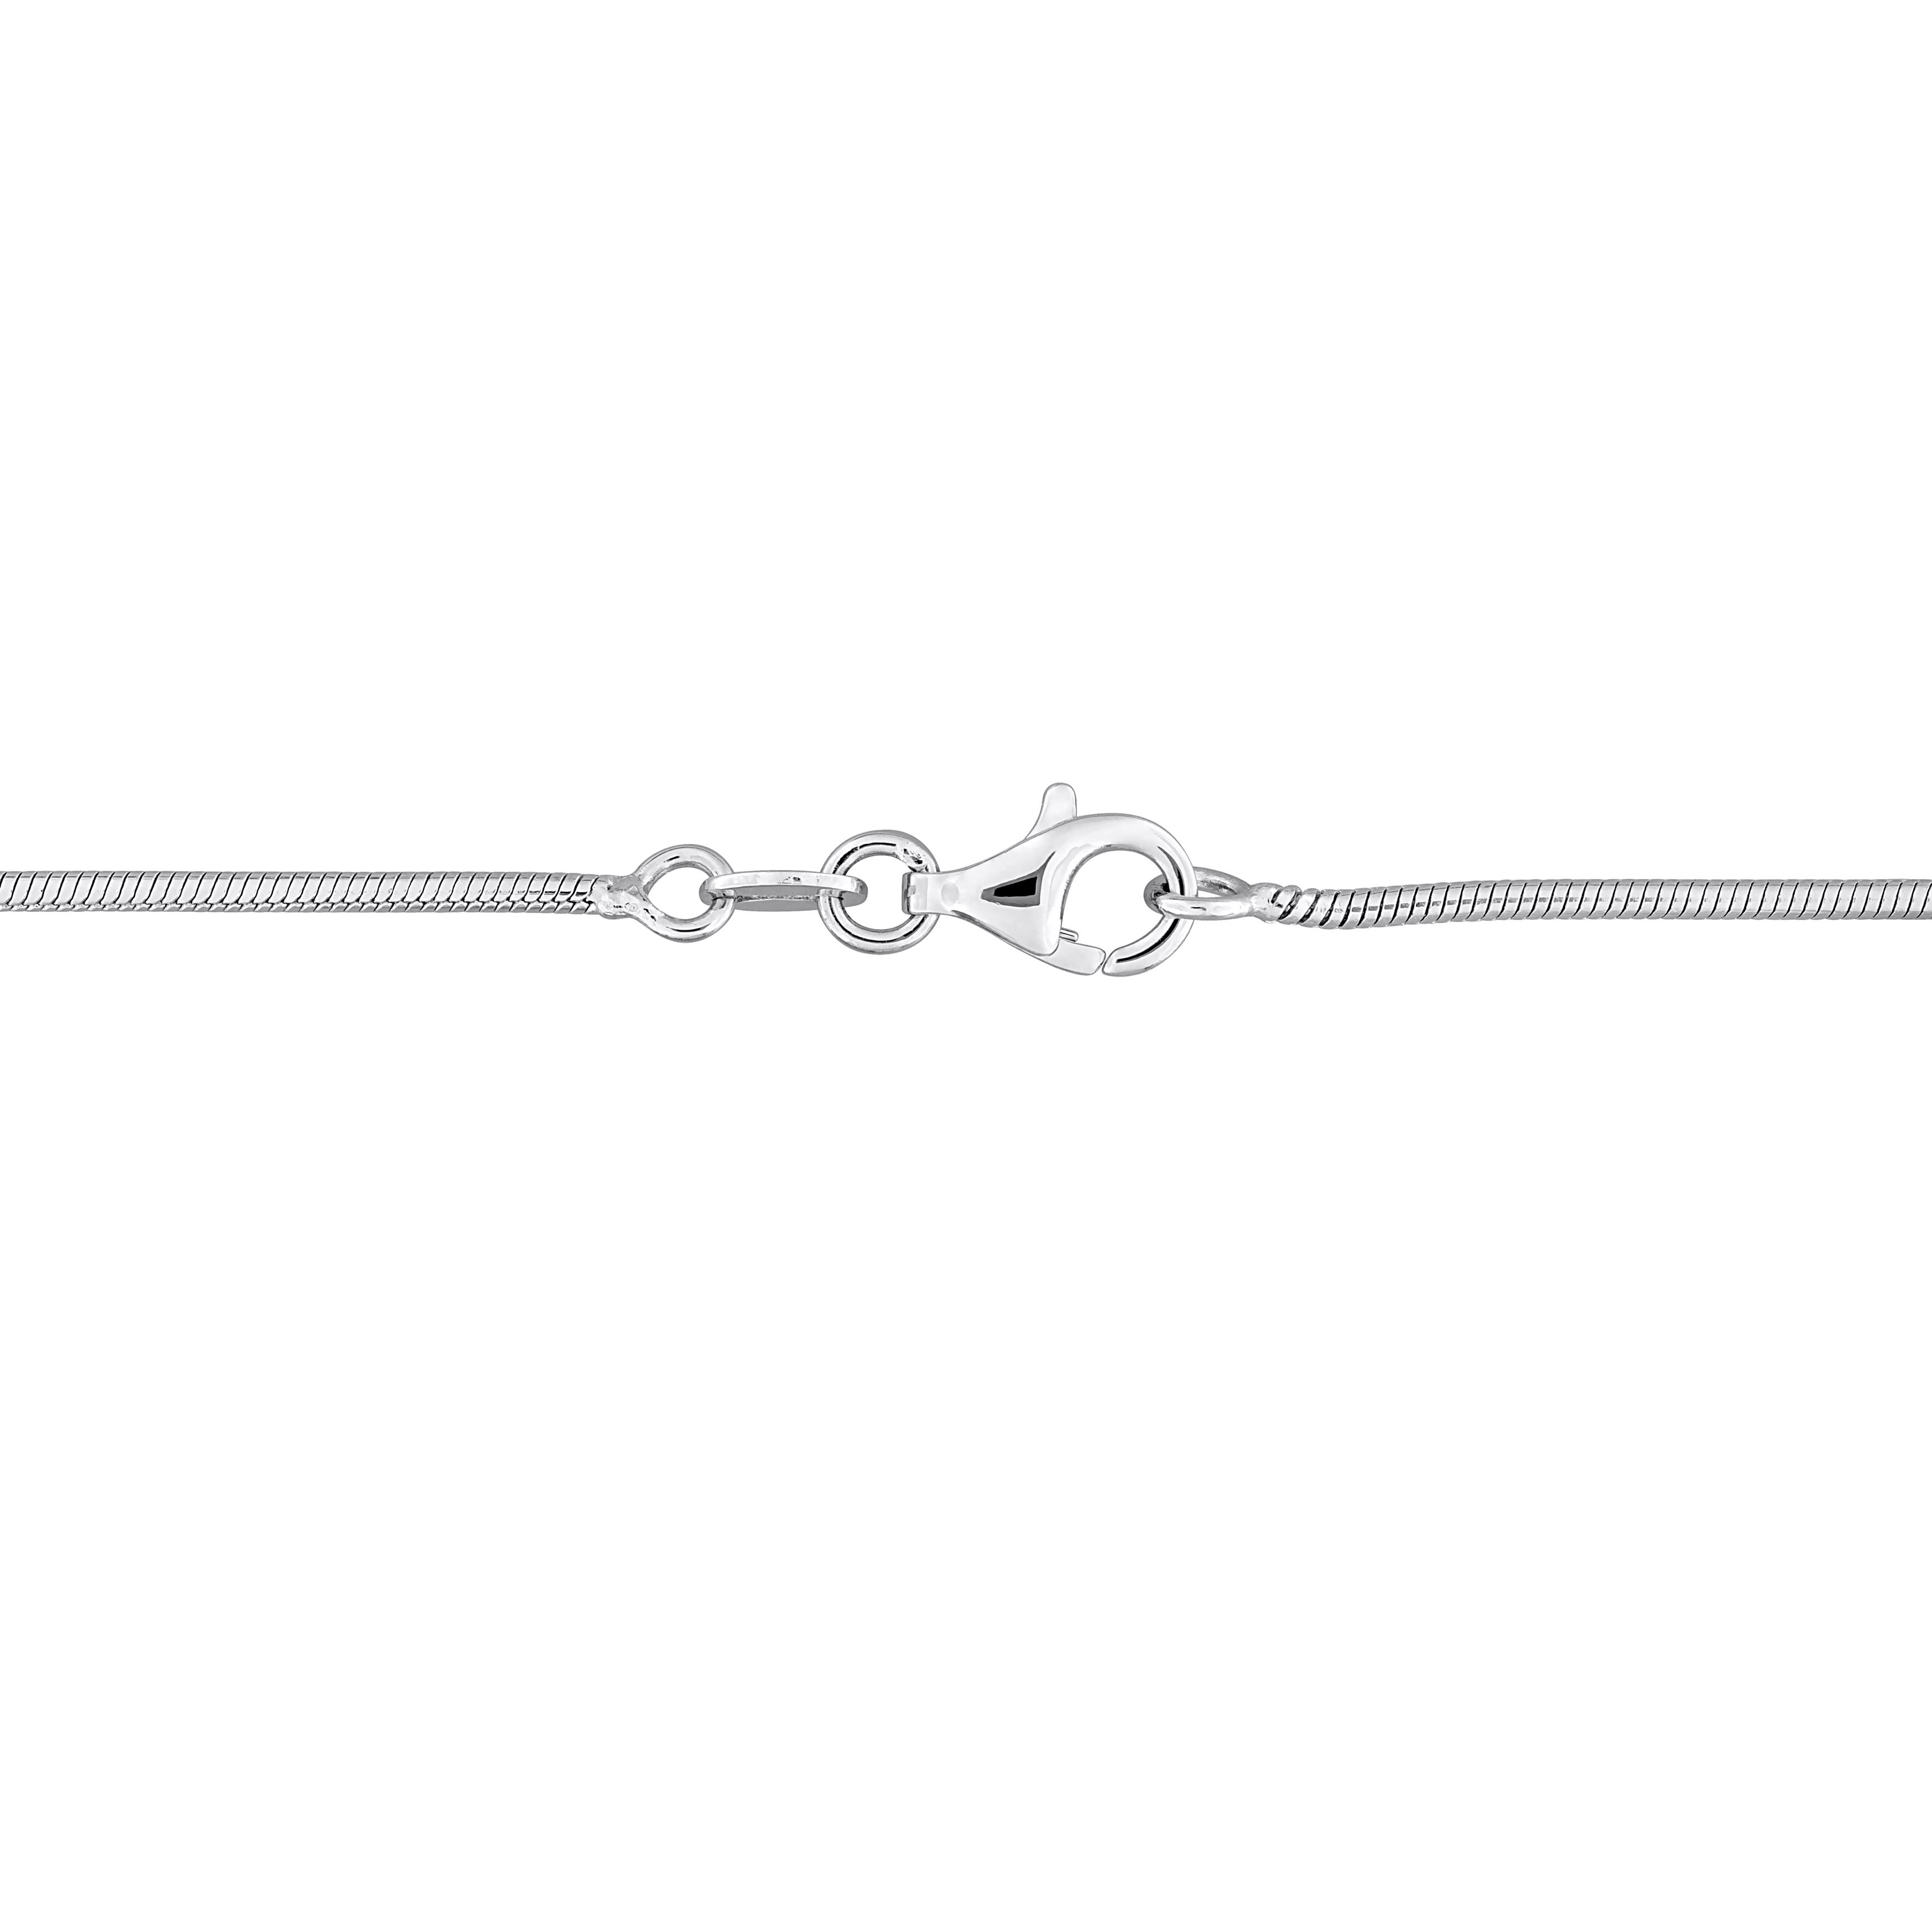 12 1/4 CT TGW Created White Sapphire Layered Necklace in Sterling Silver - 17 in.